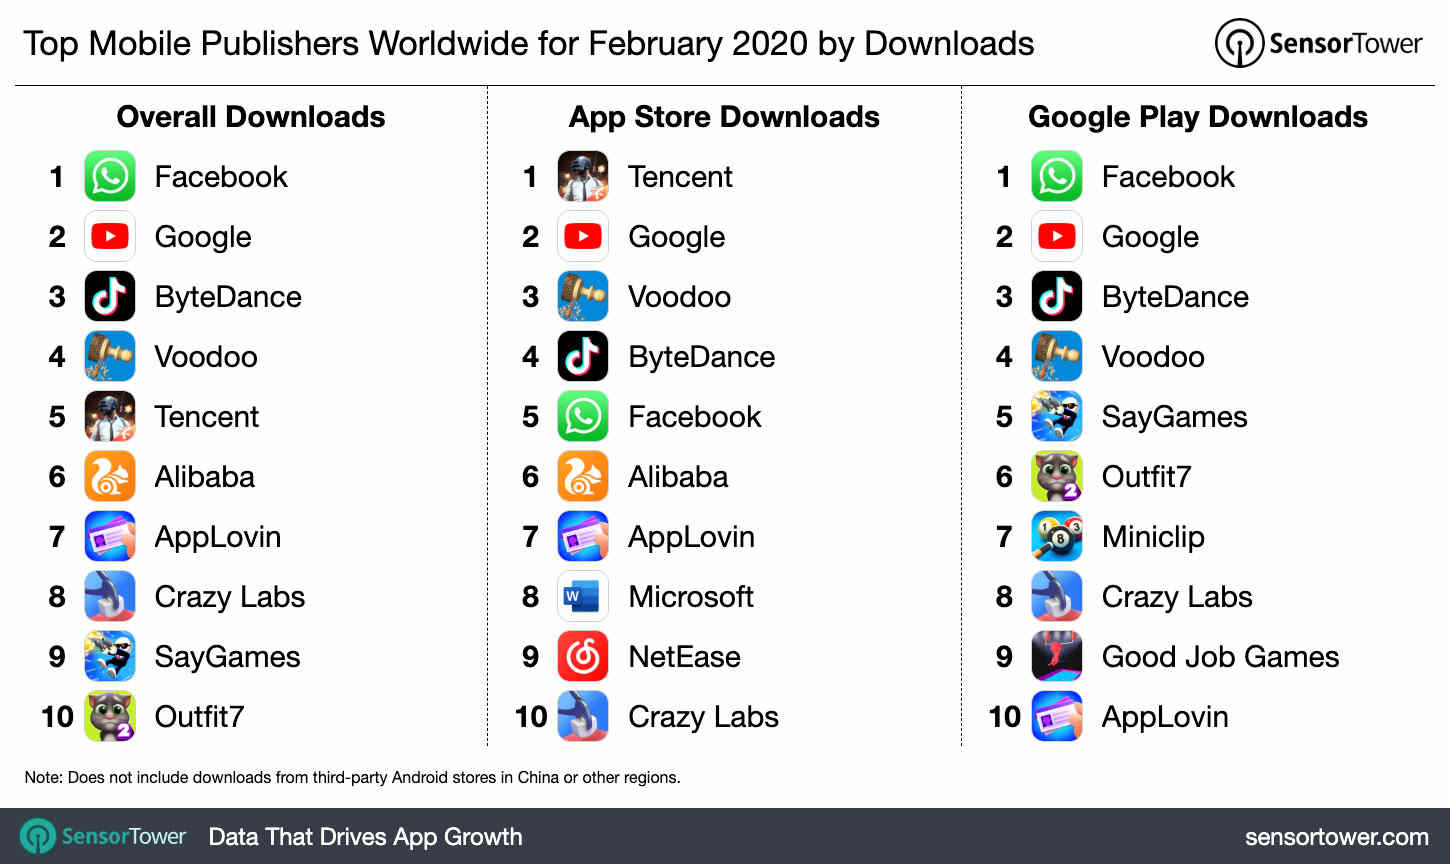 Top Mobile Publishers